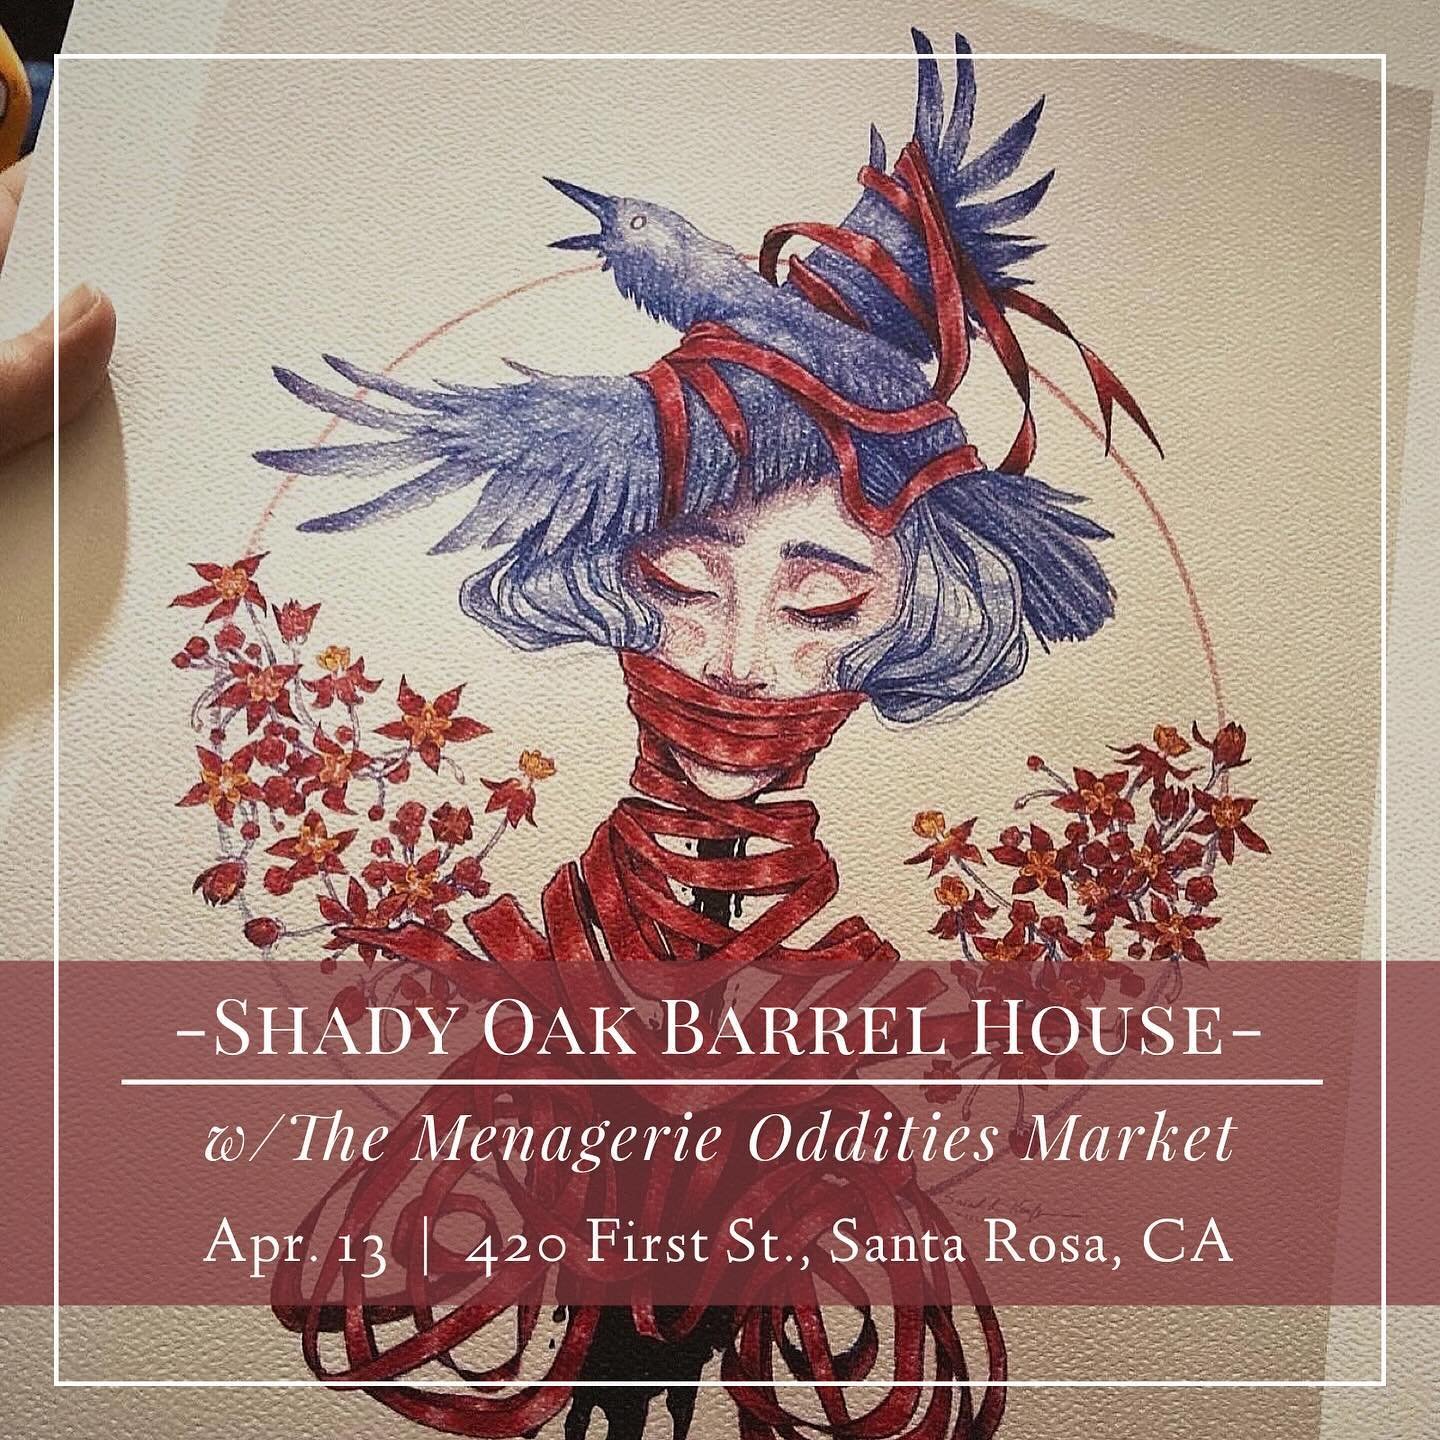 🌑 | Eclipses, illnesses, and rainclouds, oh my! As if ushered in on a fell wind and rising above the storm, so I begin my next of many shows with the @themenagerieodditiesmarket, starting this Saturday 4/13 @shadyoakbeer in Santa Rosa, CA. &mdash; 1